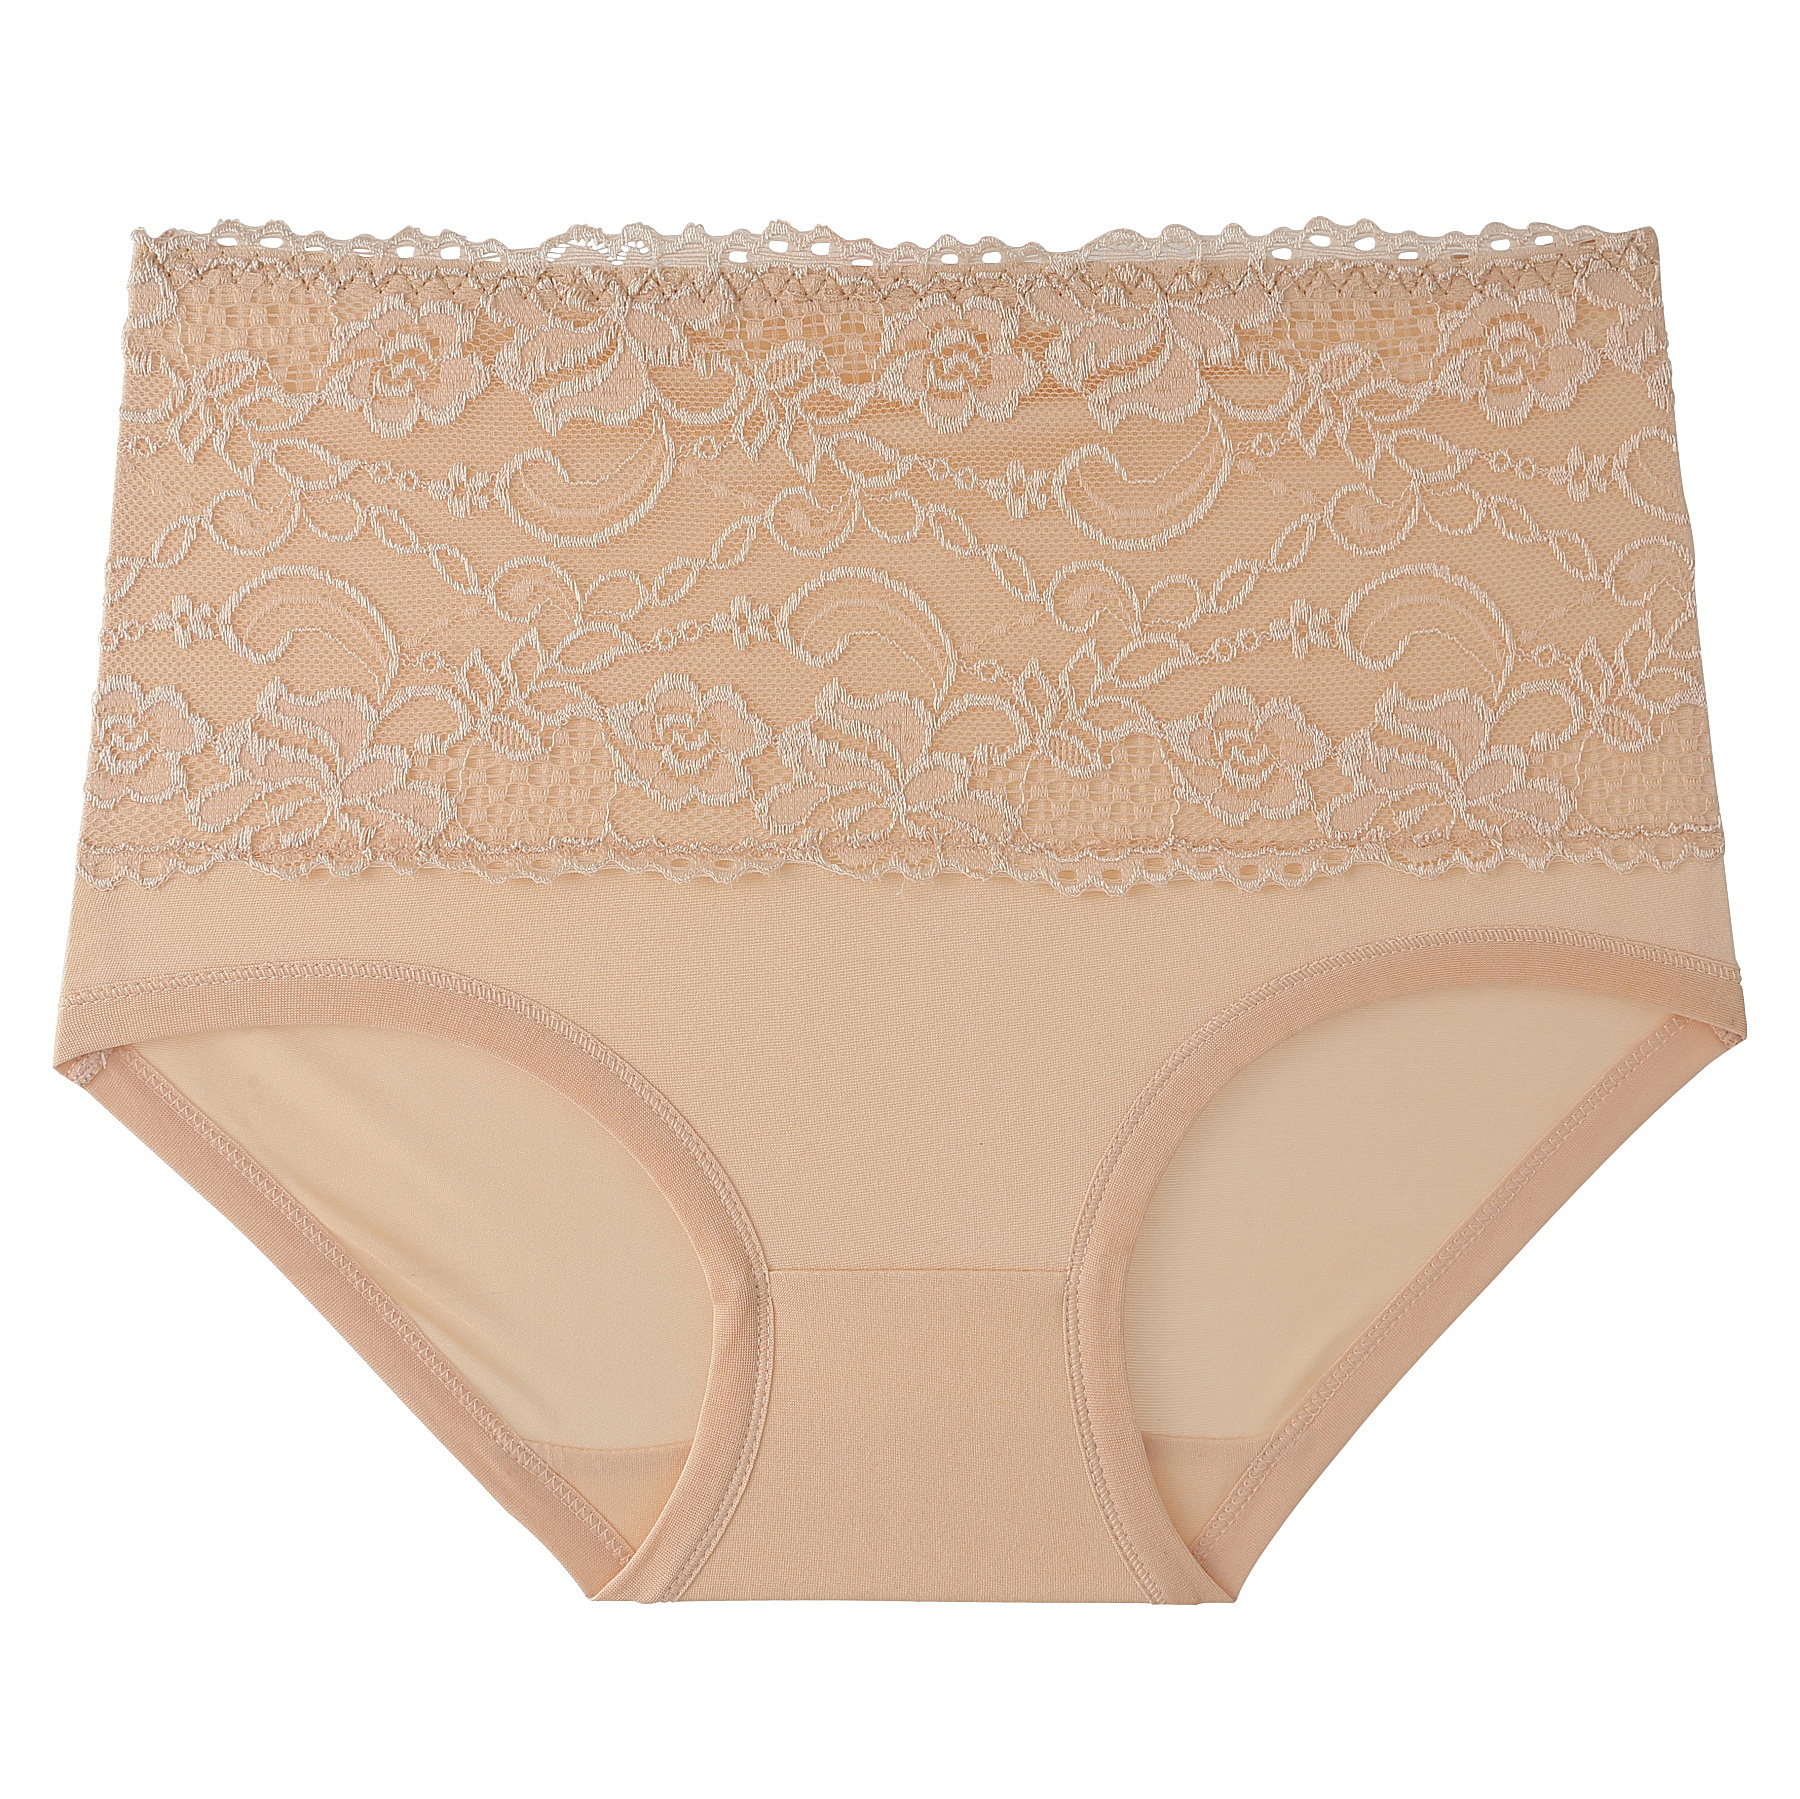 Wholesale Ladies Tight Panty Cotton, Lace, Seamless, Shaping